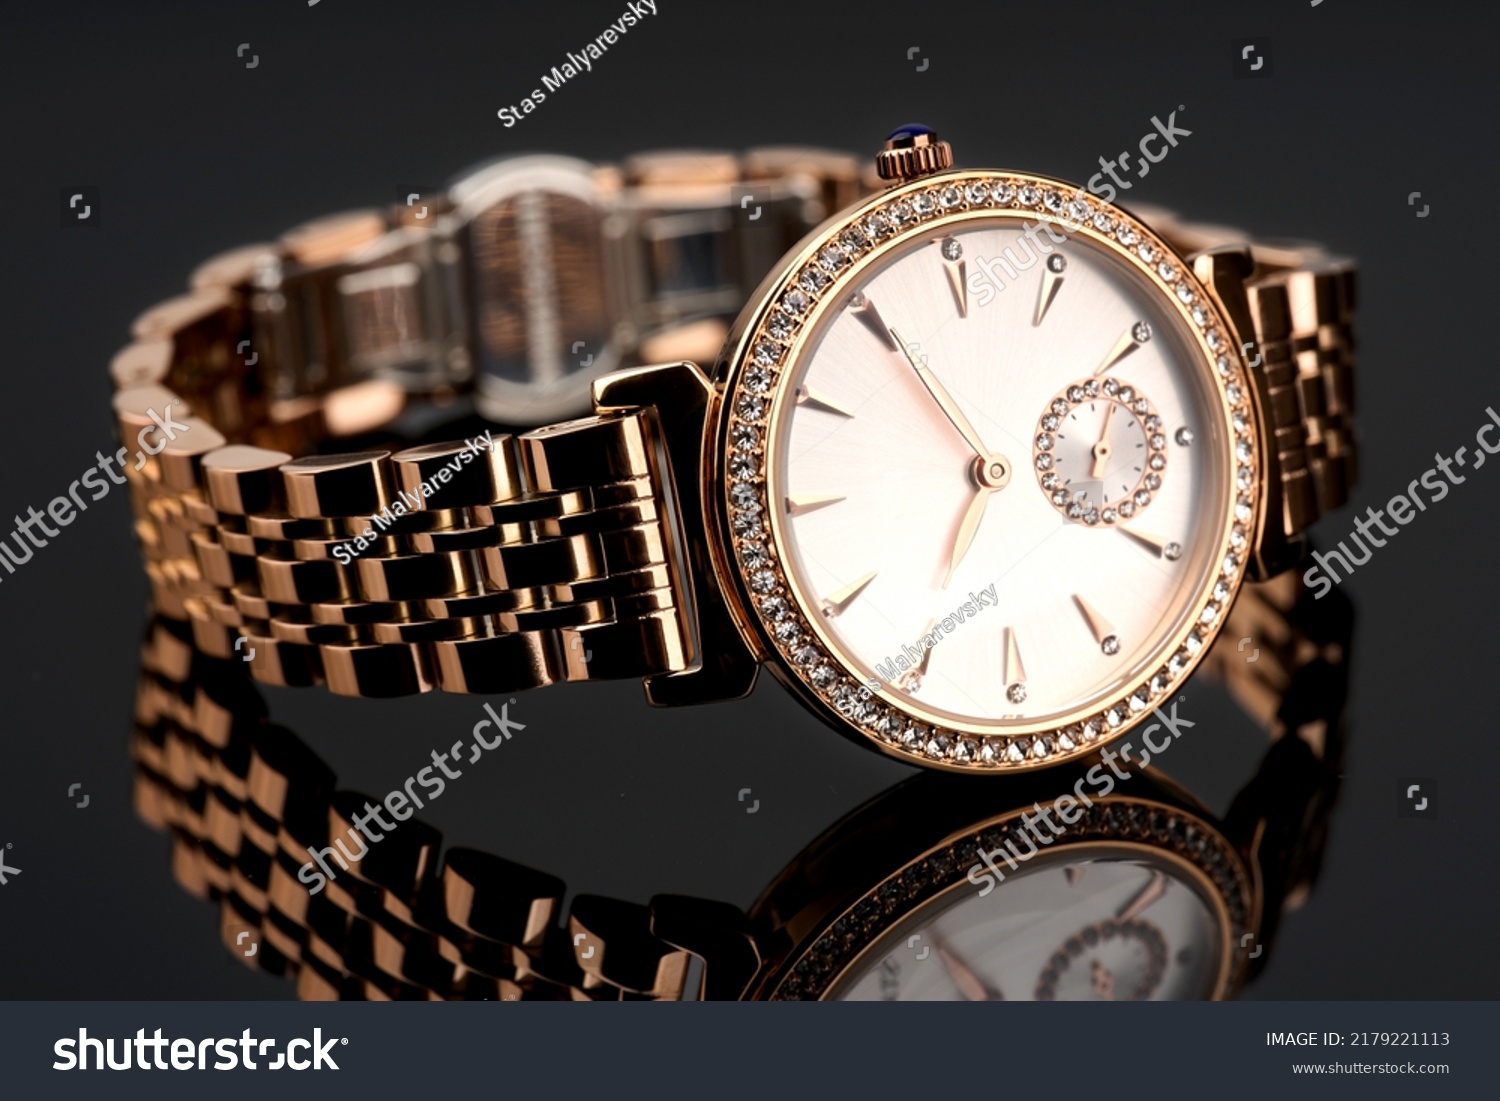 classic chronograph wristwatch. Swiss golden wrist watch. luxury fashion watch stainless steel chrome with geometric dial. Luxury watch. With clipping path. Gold watch.  #2179221113